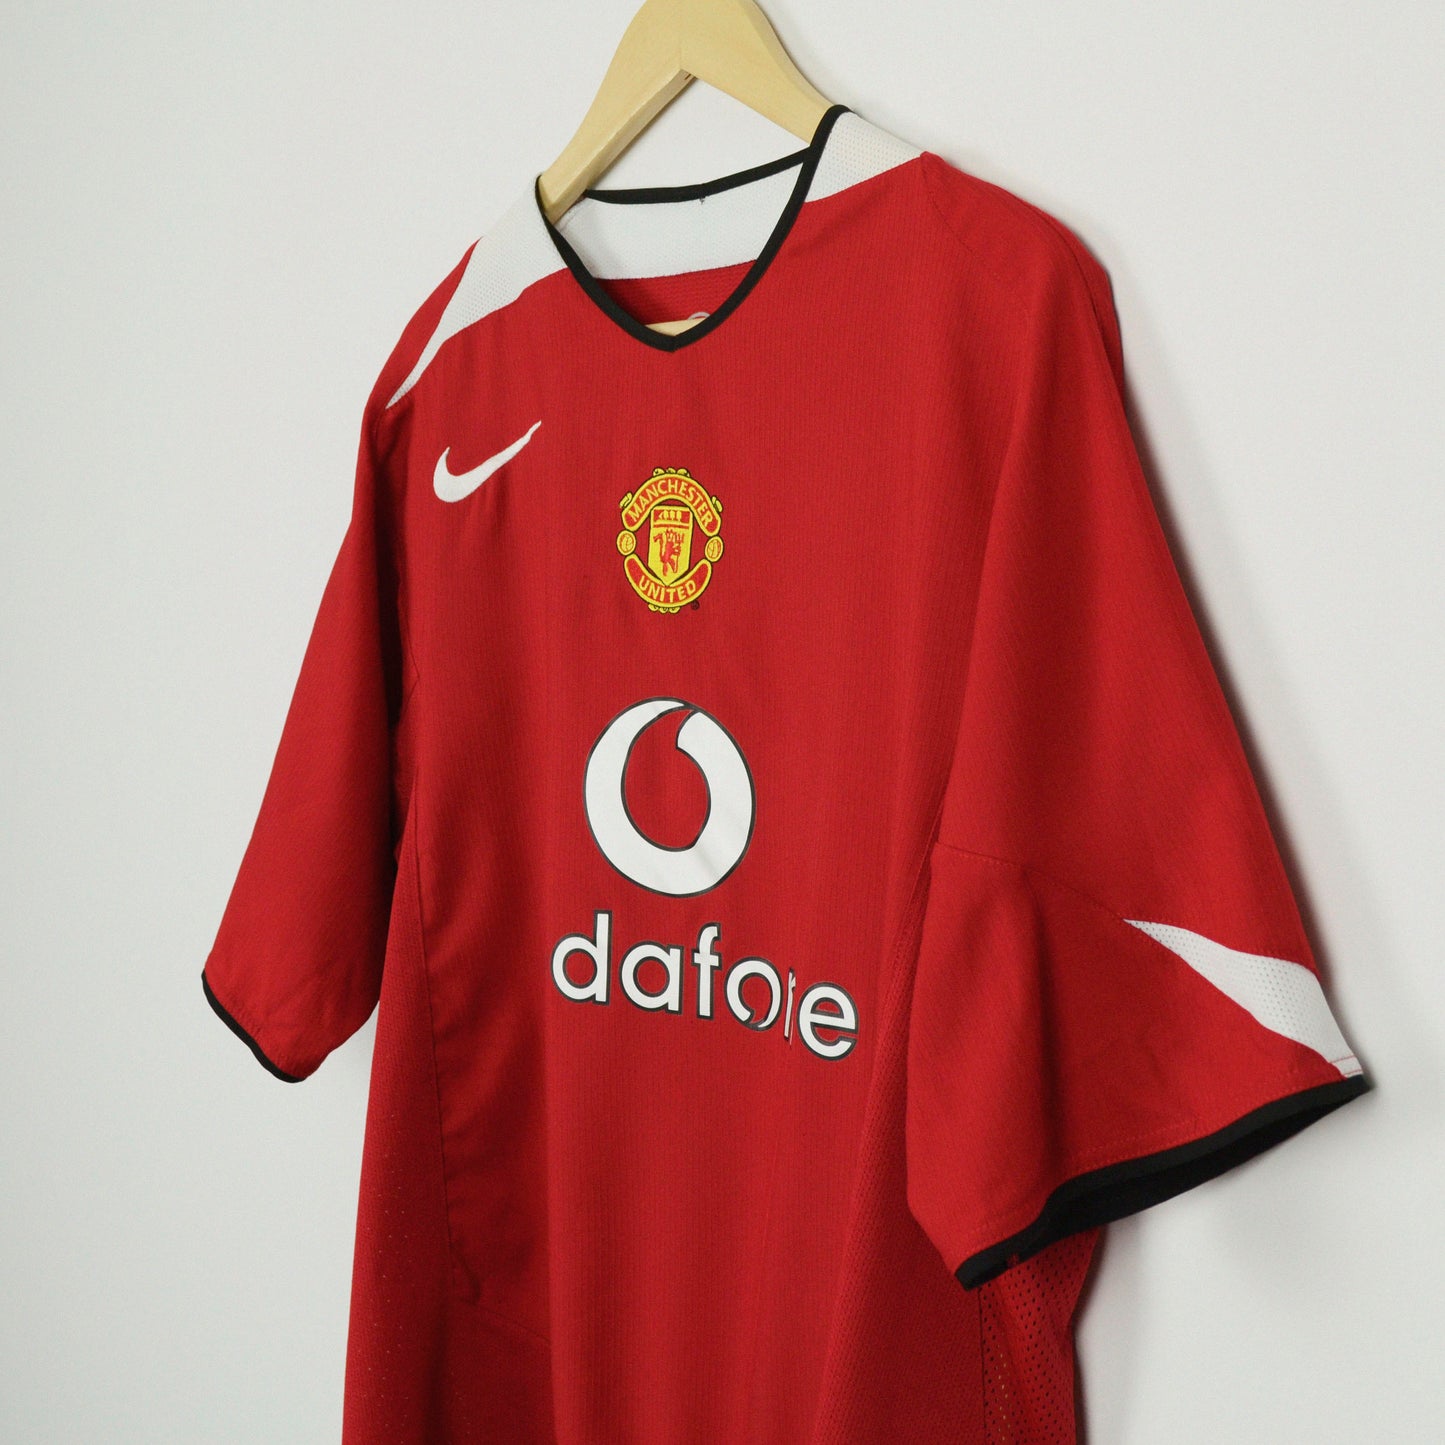 2004-06 Nike Manchester United Home Shirt 'Rooney 8' XL